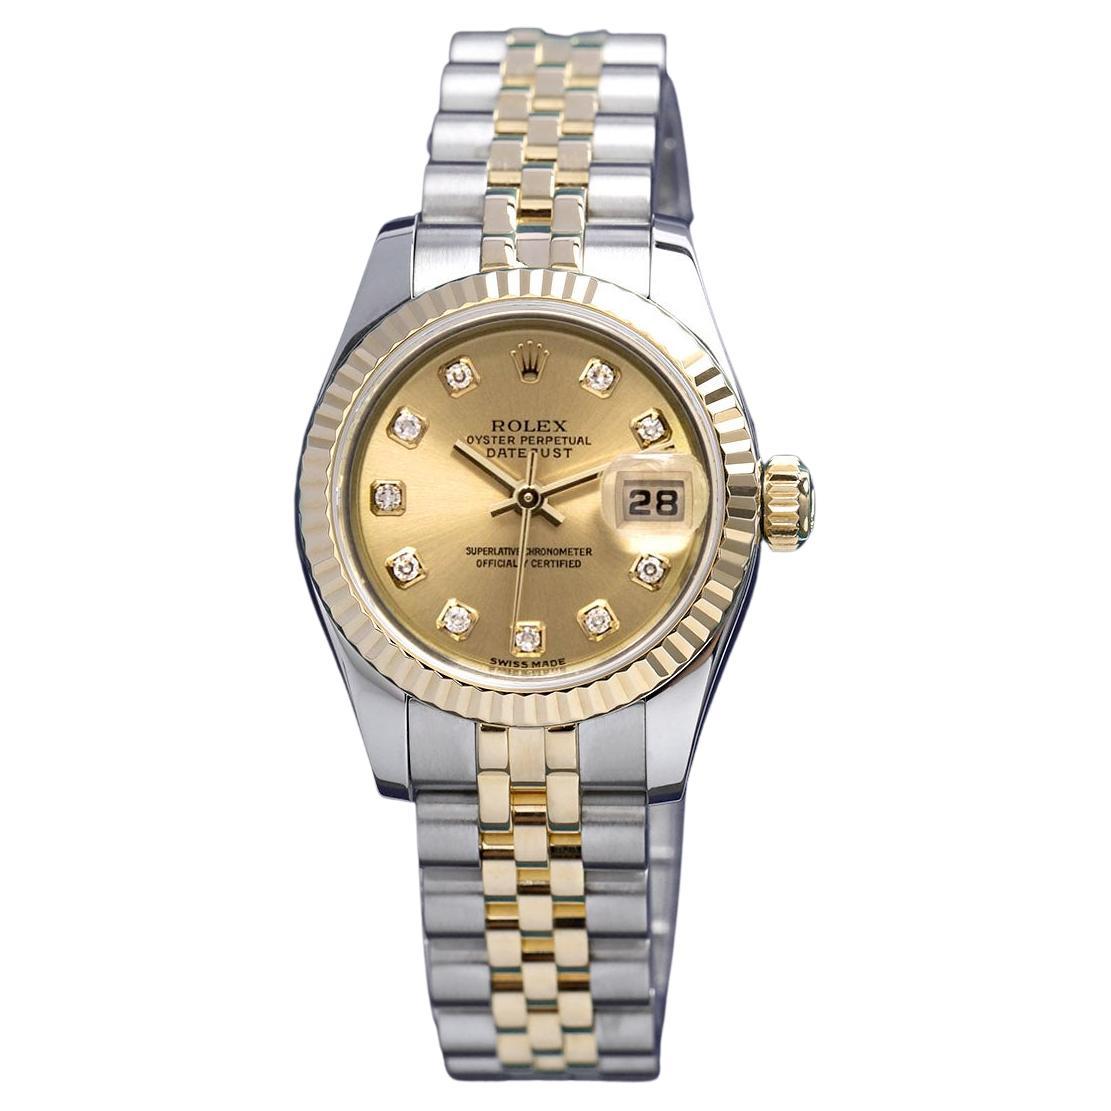 Rolex Lady-Datejust 179173 Steel/Yellow Gold Watch Champagne Diamond Dial